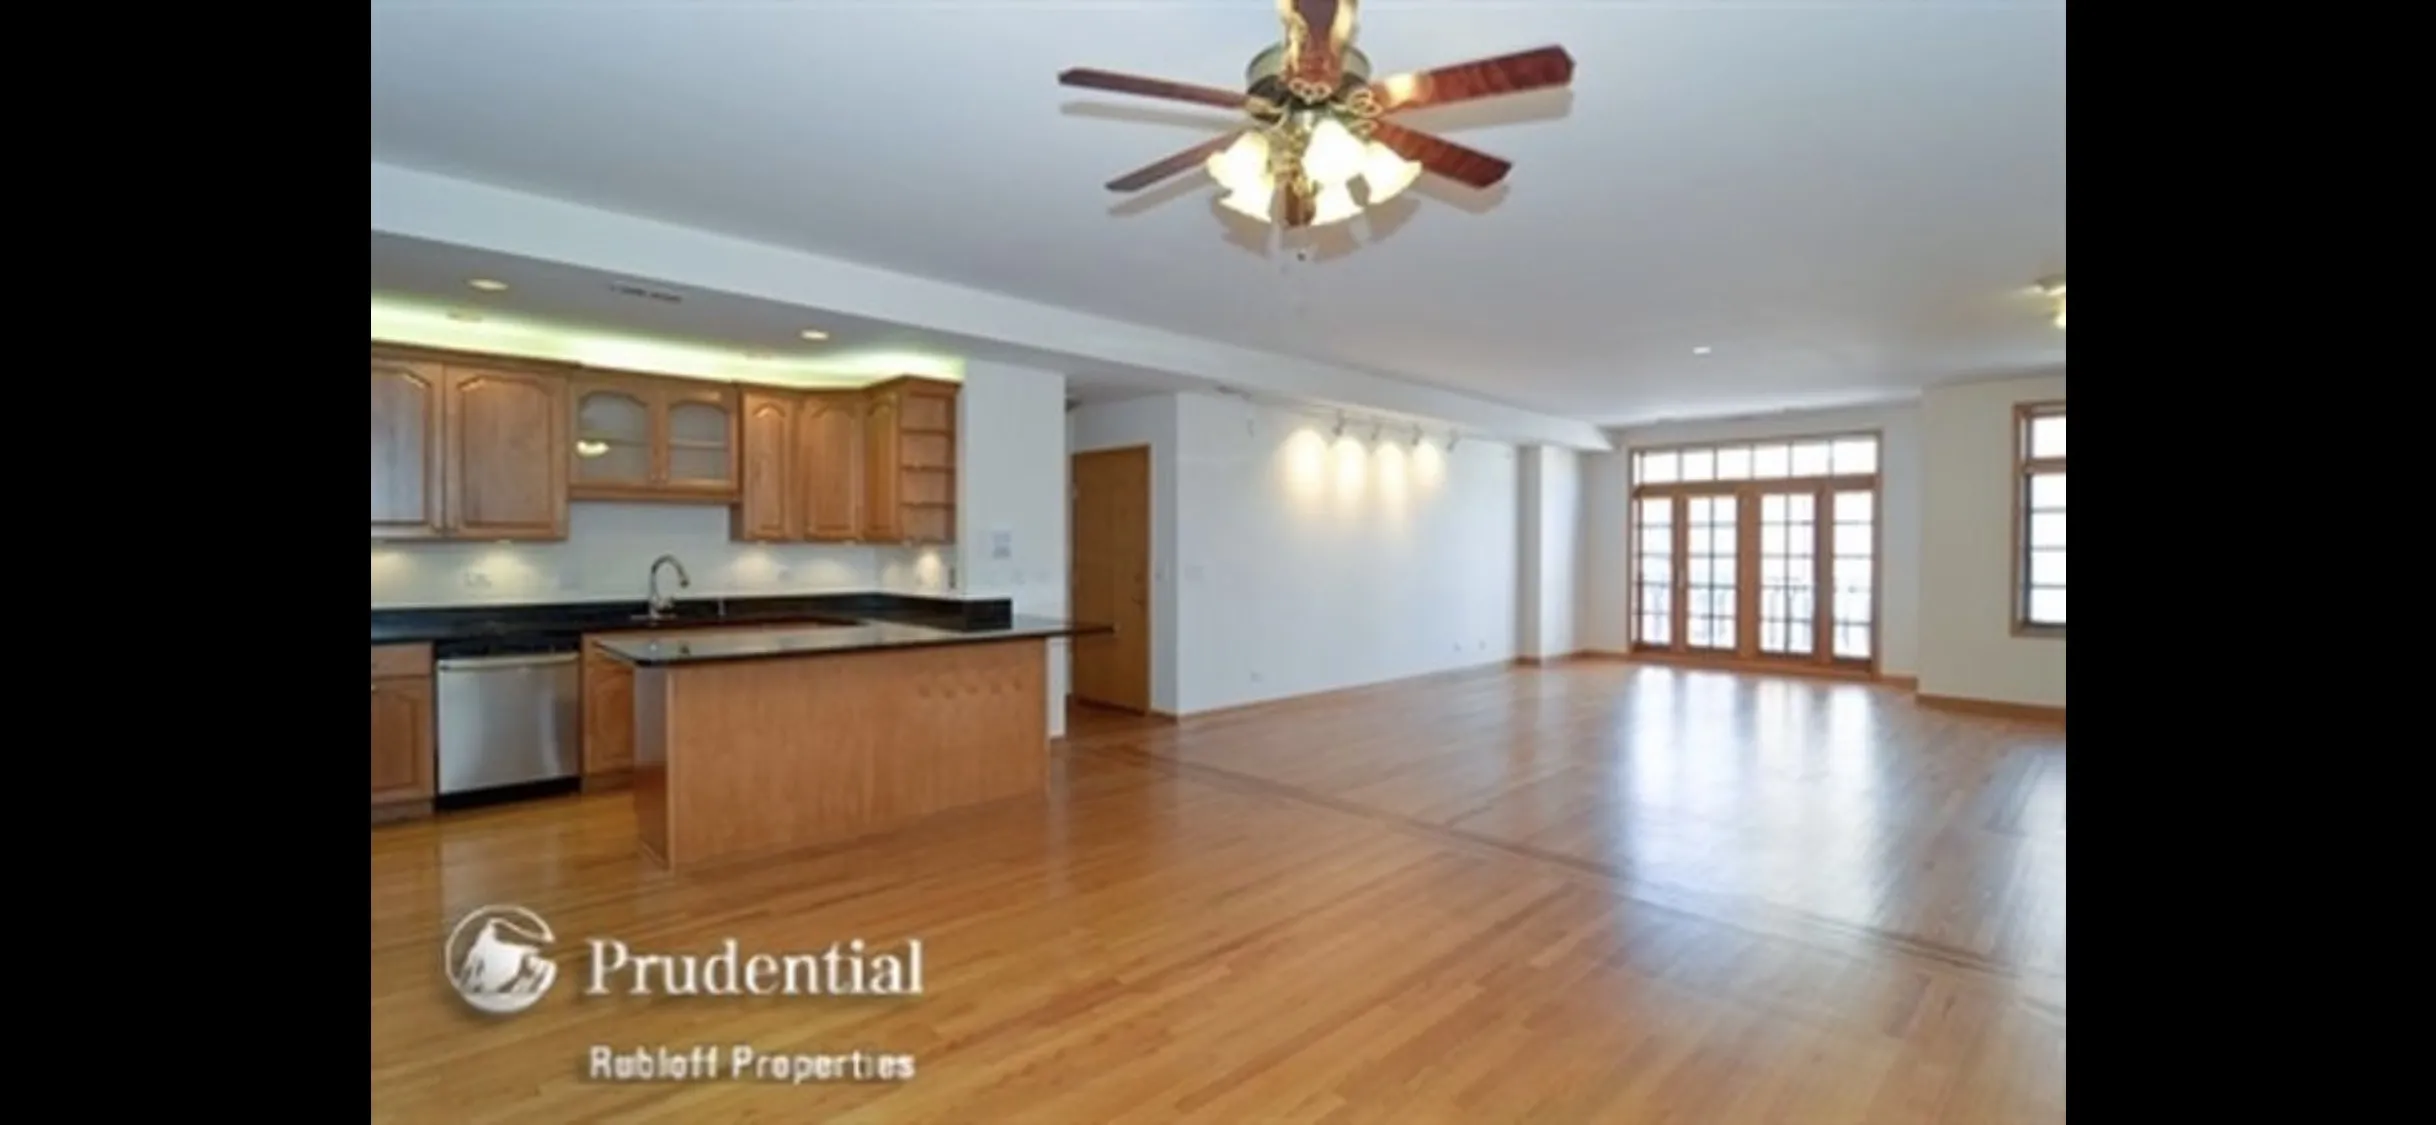 2533 N HALSTED ST 60614-unit#2N-Chicago-IL